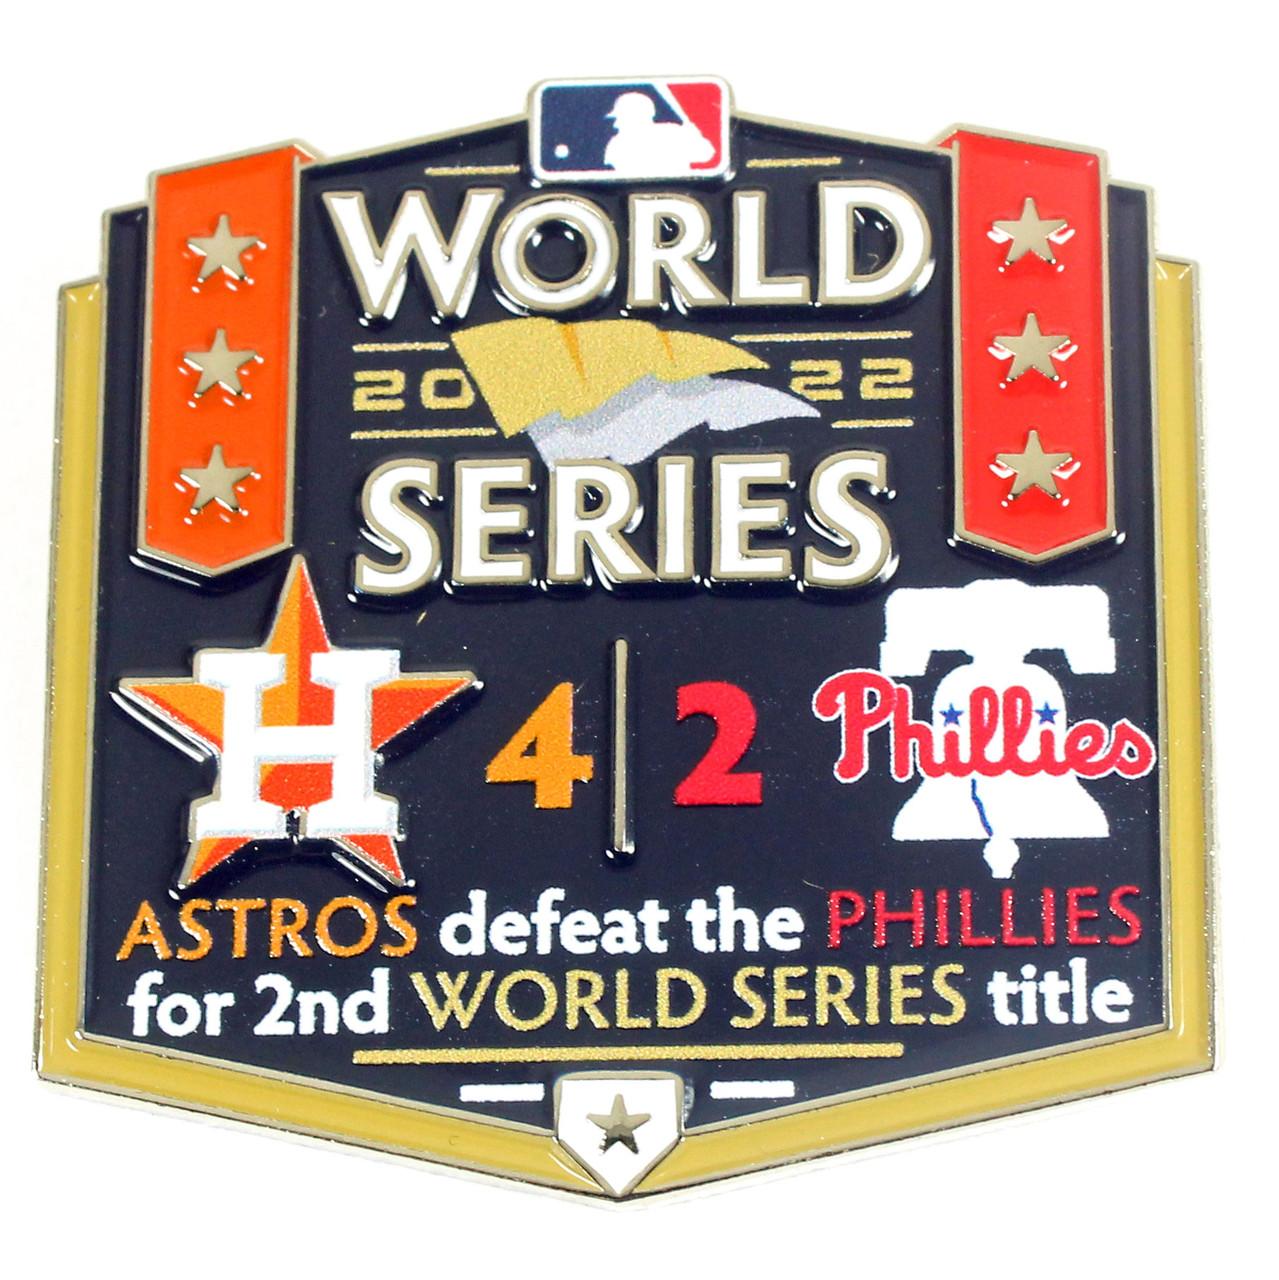 St. Louis Cardinals 11 -Time World Series Champions Pin - Limited 1,000